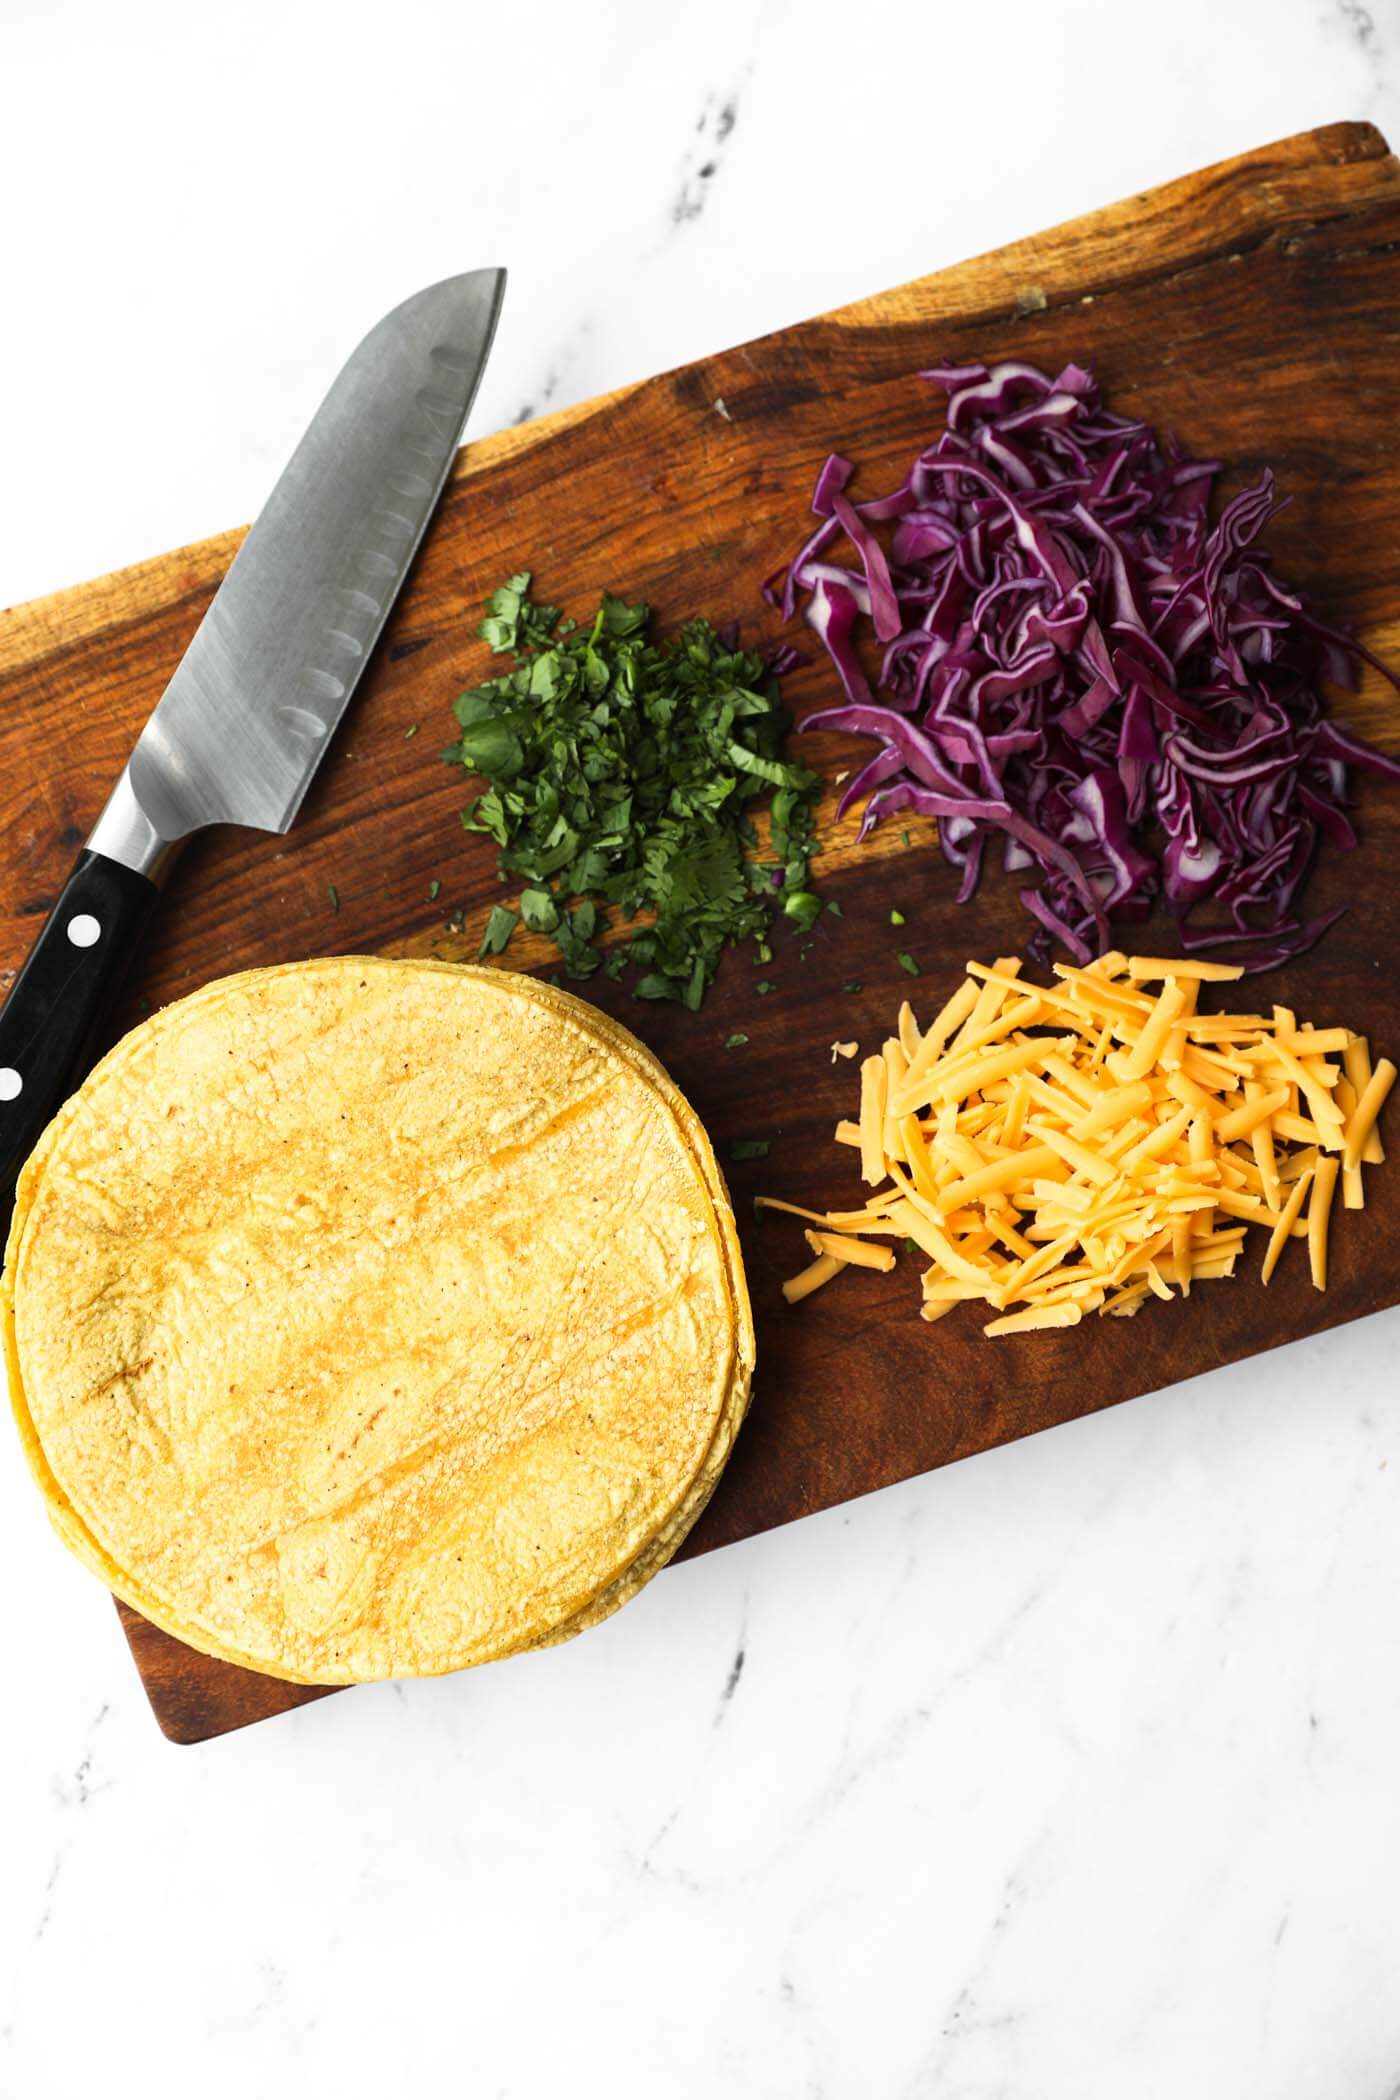 Overhead image of taco fixings on a cutting board - corn tortillas, grated cheese, chopped cabbage and cilantro.